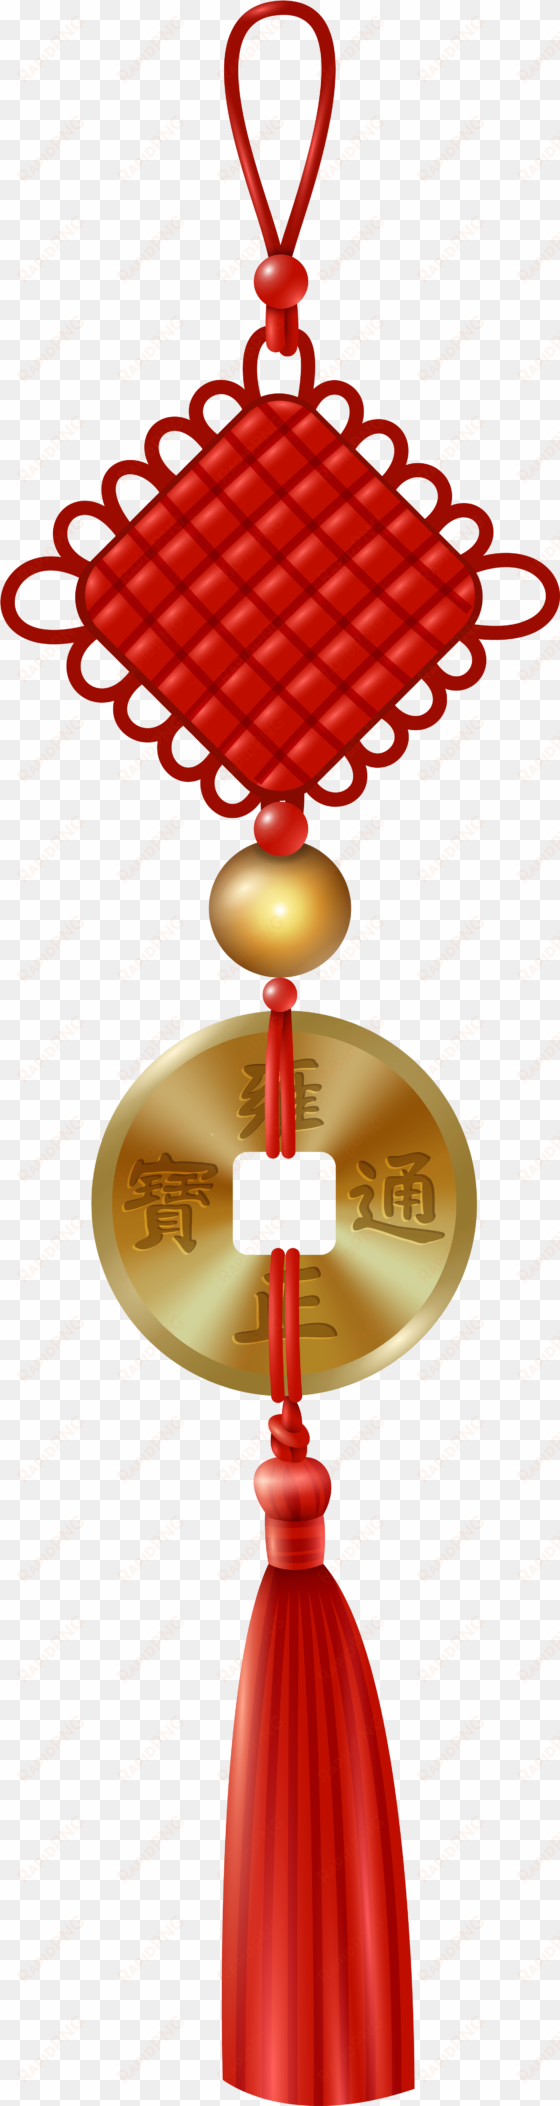 chinese hanging decor png clip art - chinese hanging ornaments png